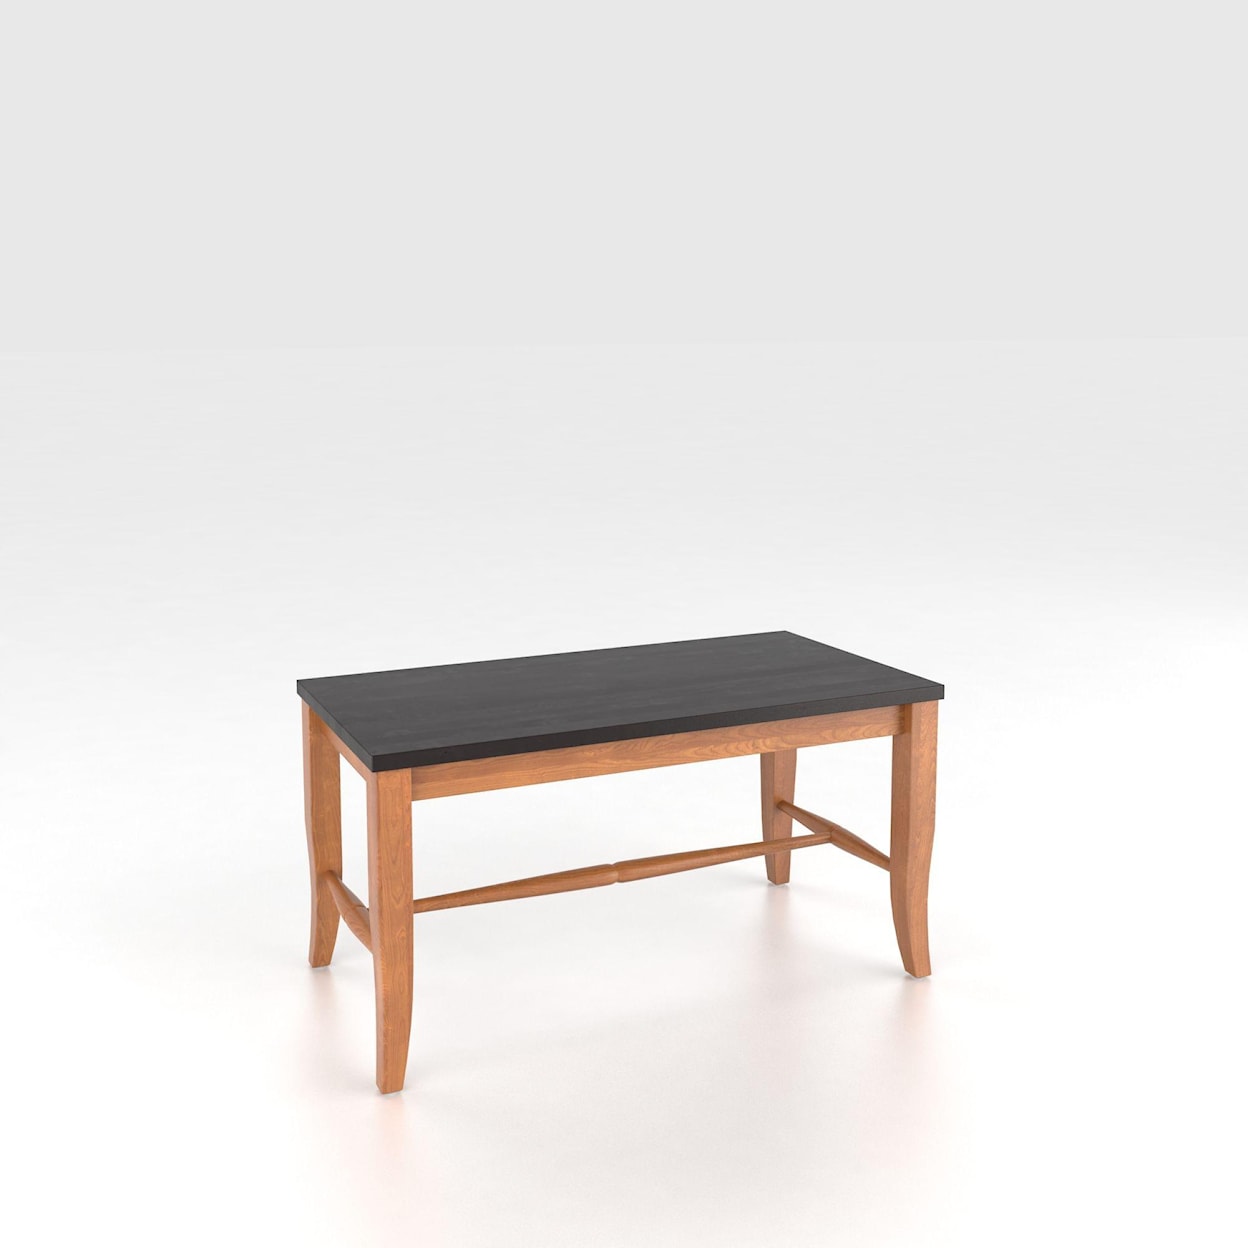 Canadel Canadel Customizable 18" Wooden Seat Bench